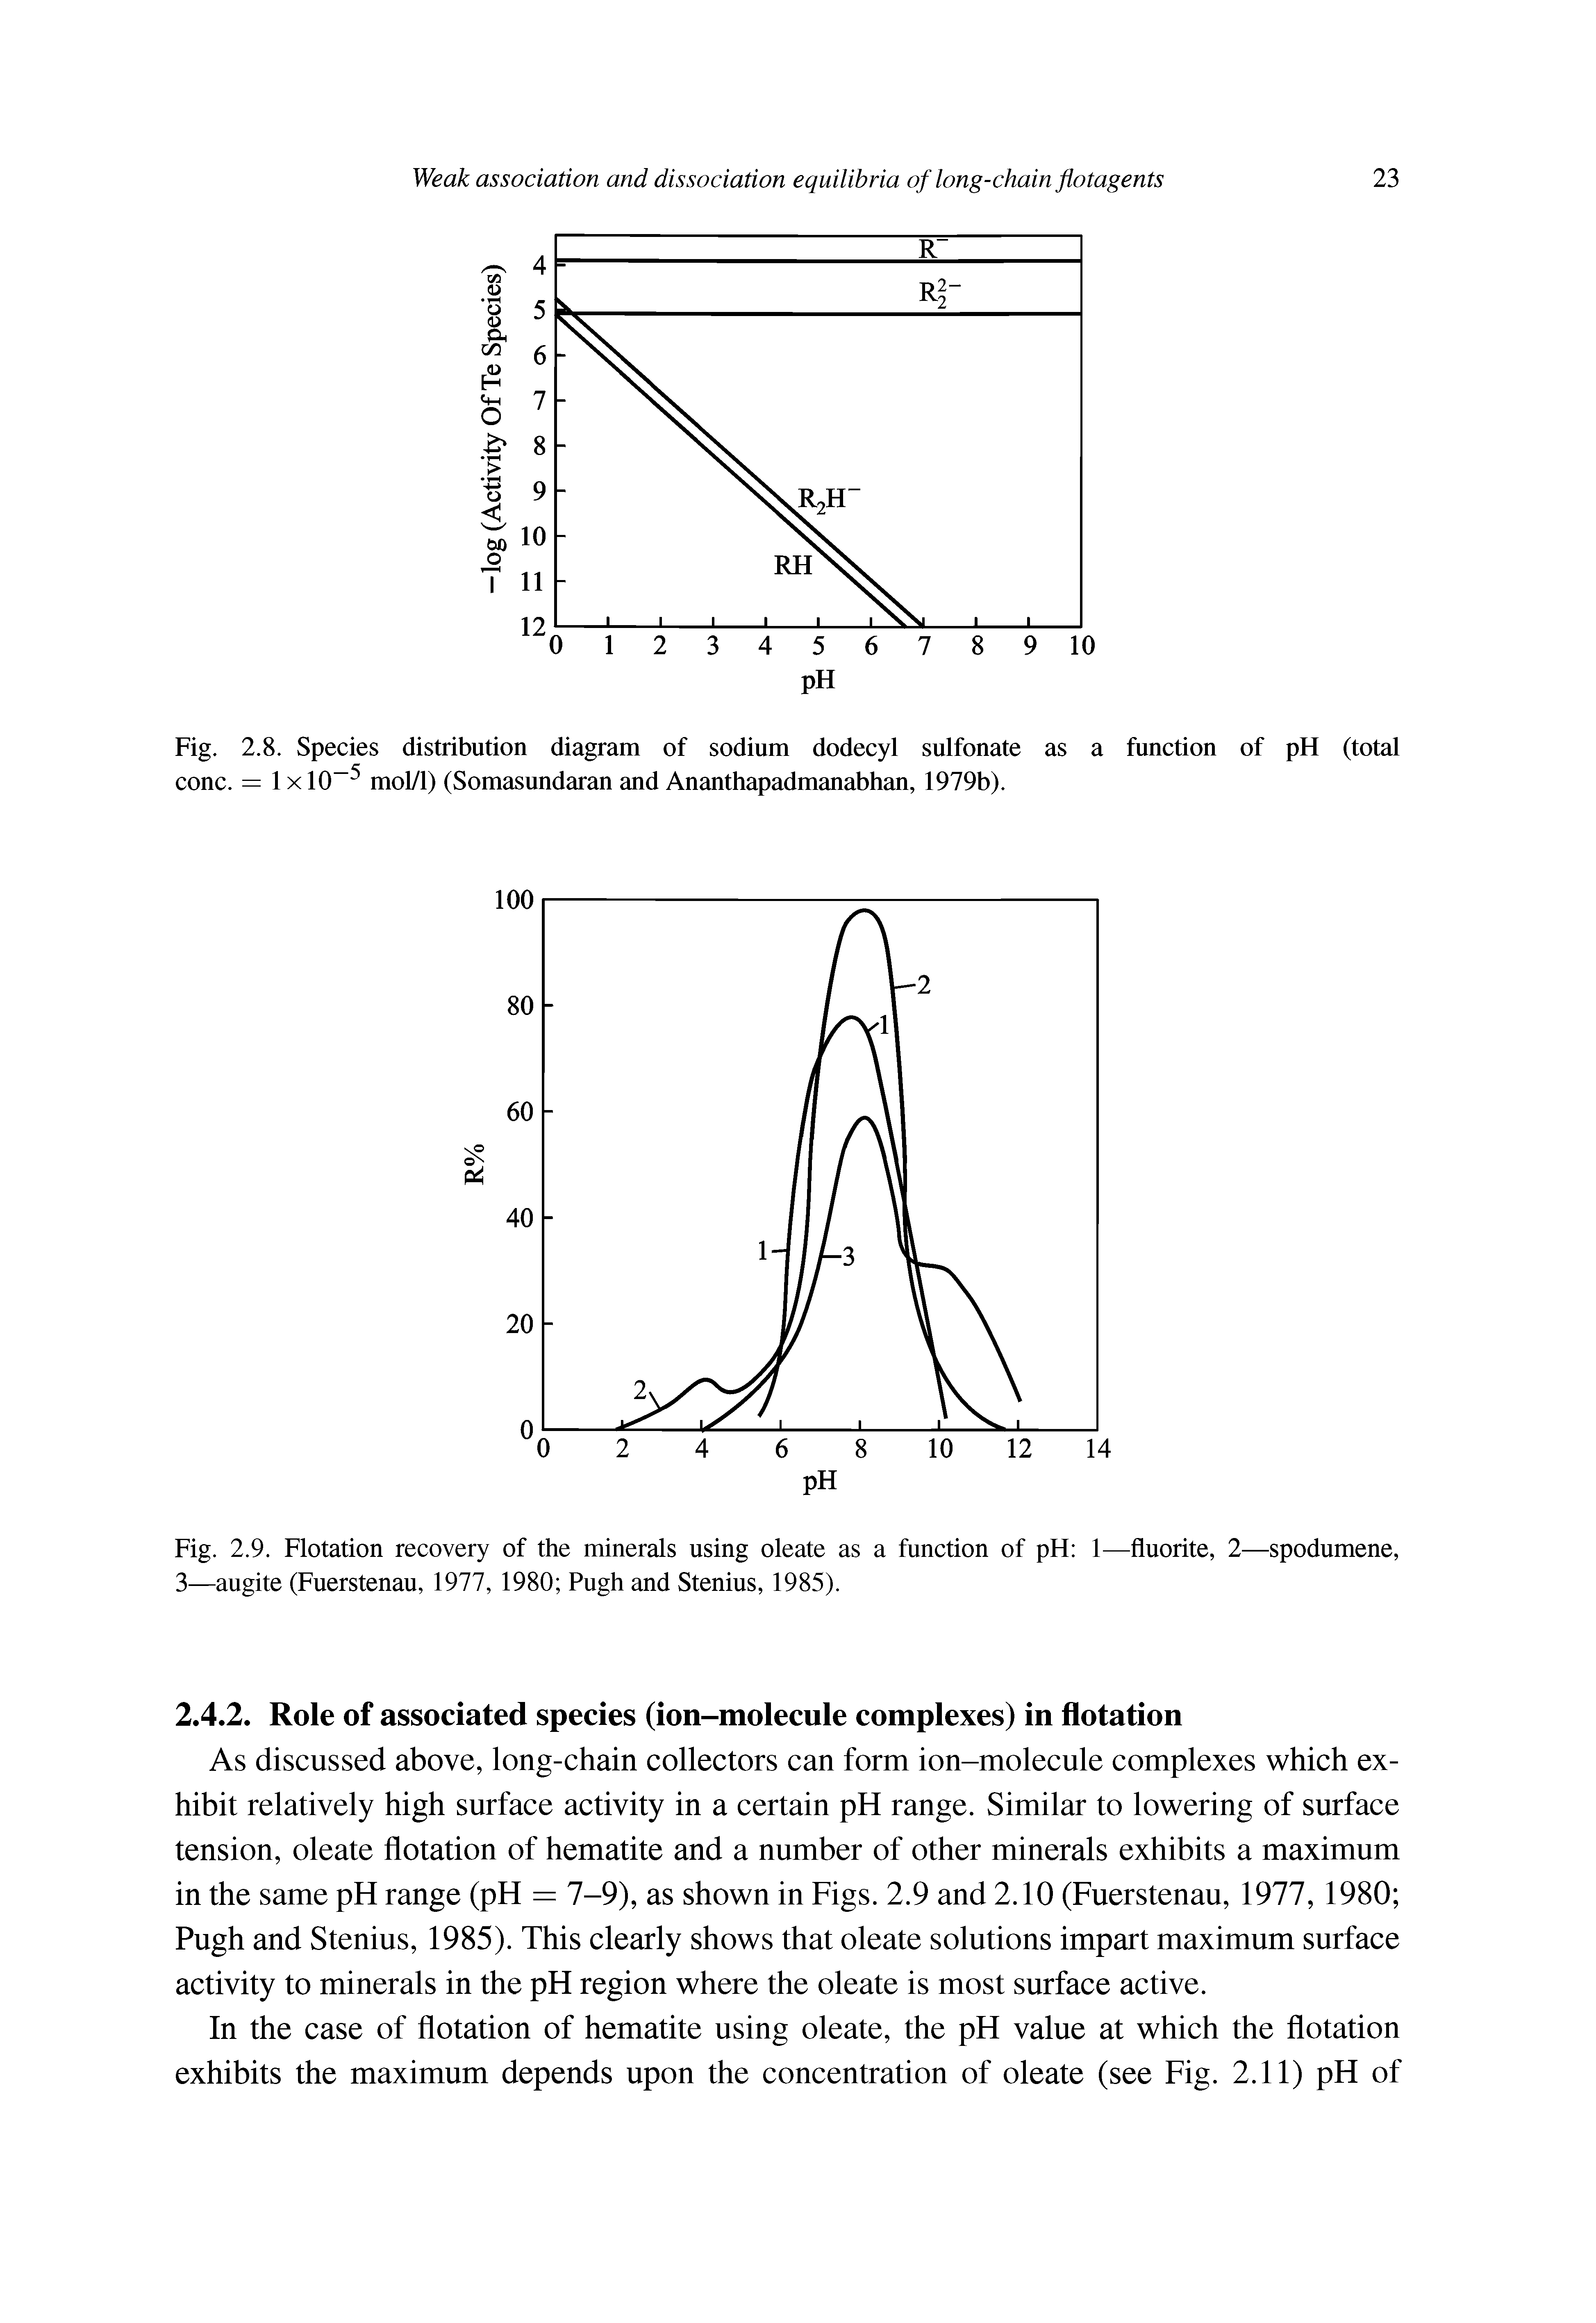 Fig. 2.9. Flotation recovery of the minerals using oleate as a function of pH 1—fluorite, 2—spodumene, 3—augite (Fuerstenau, 1977, 1980 Pugh and Stenius, 1985).